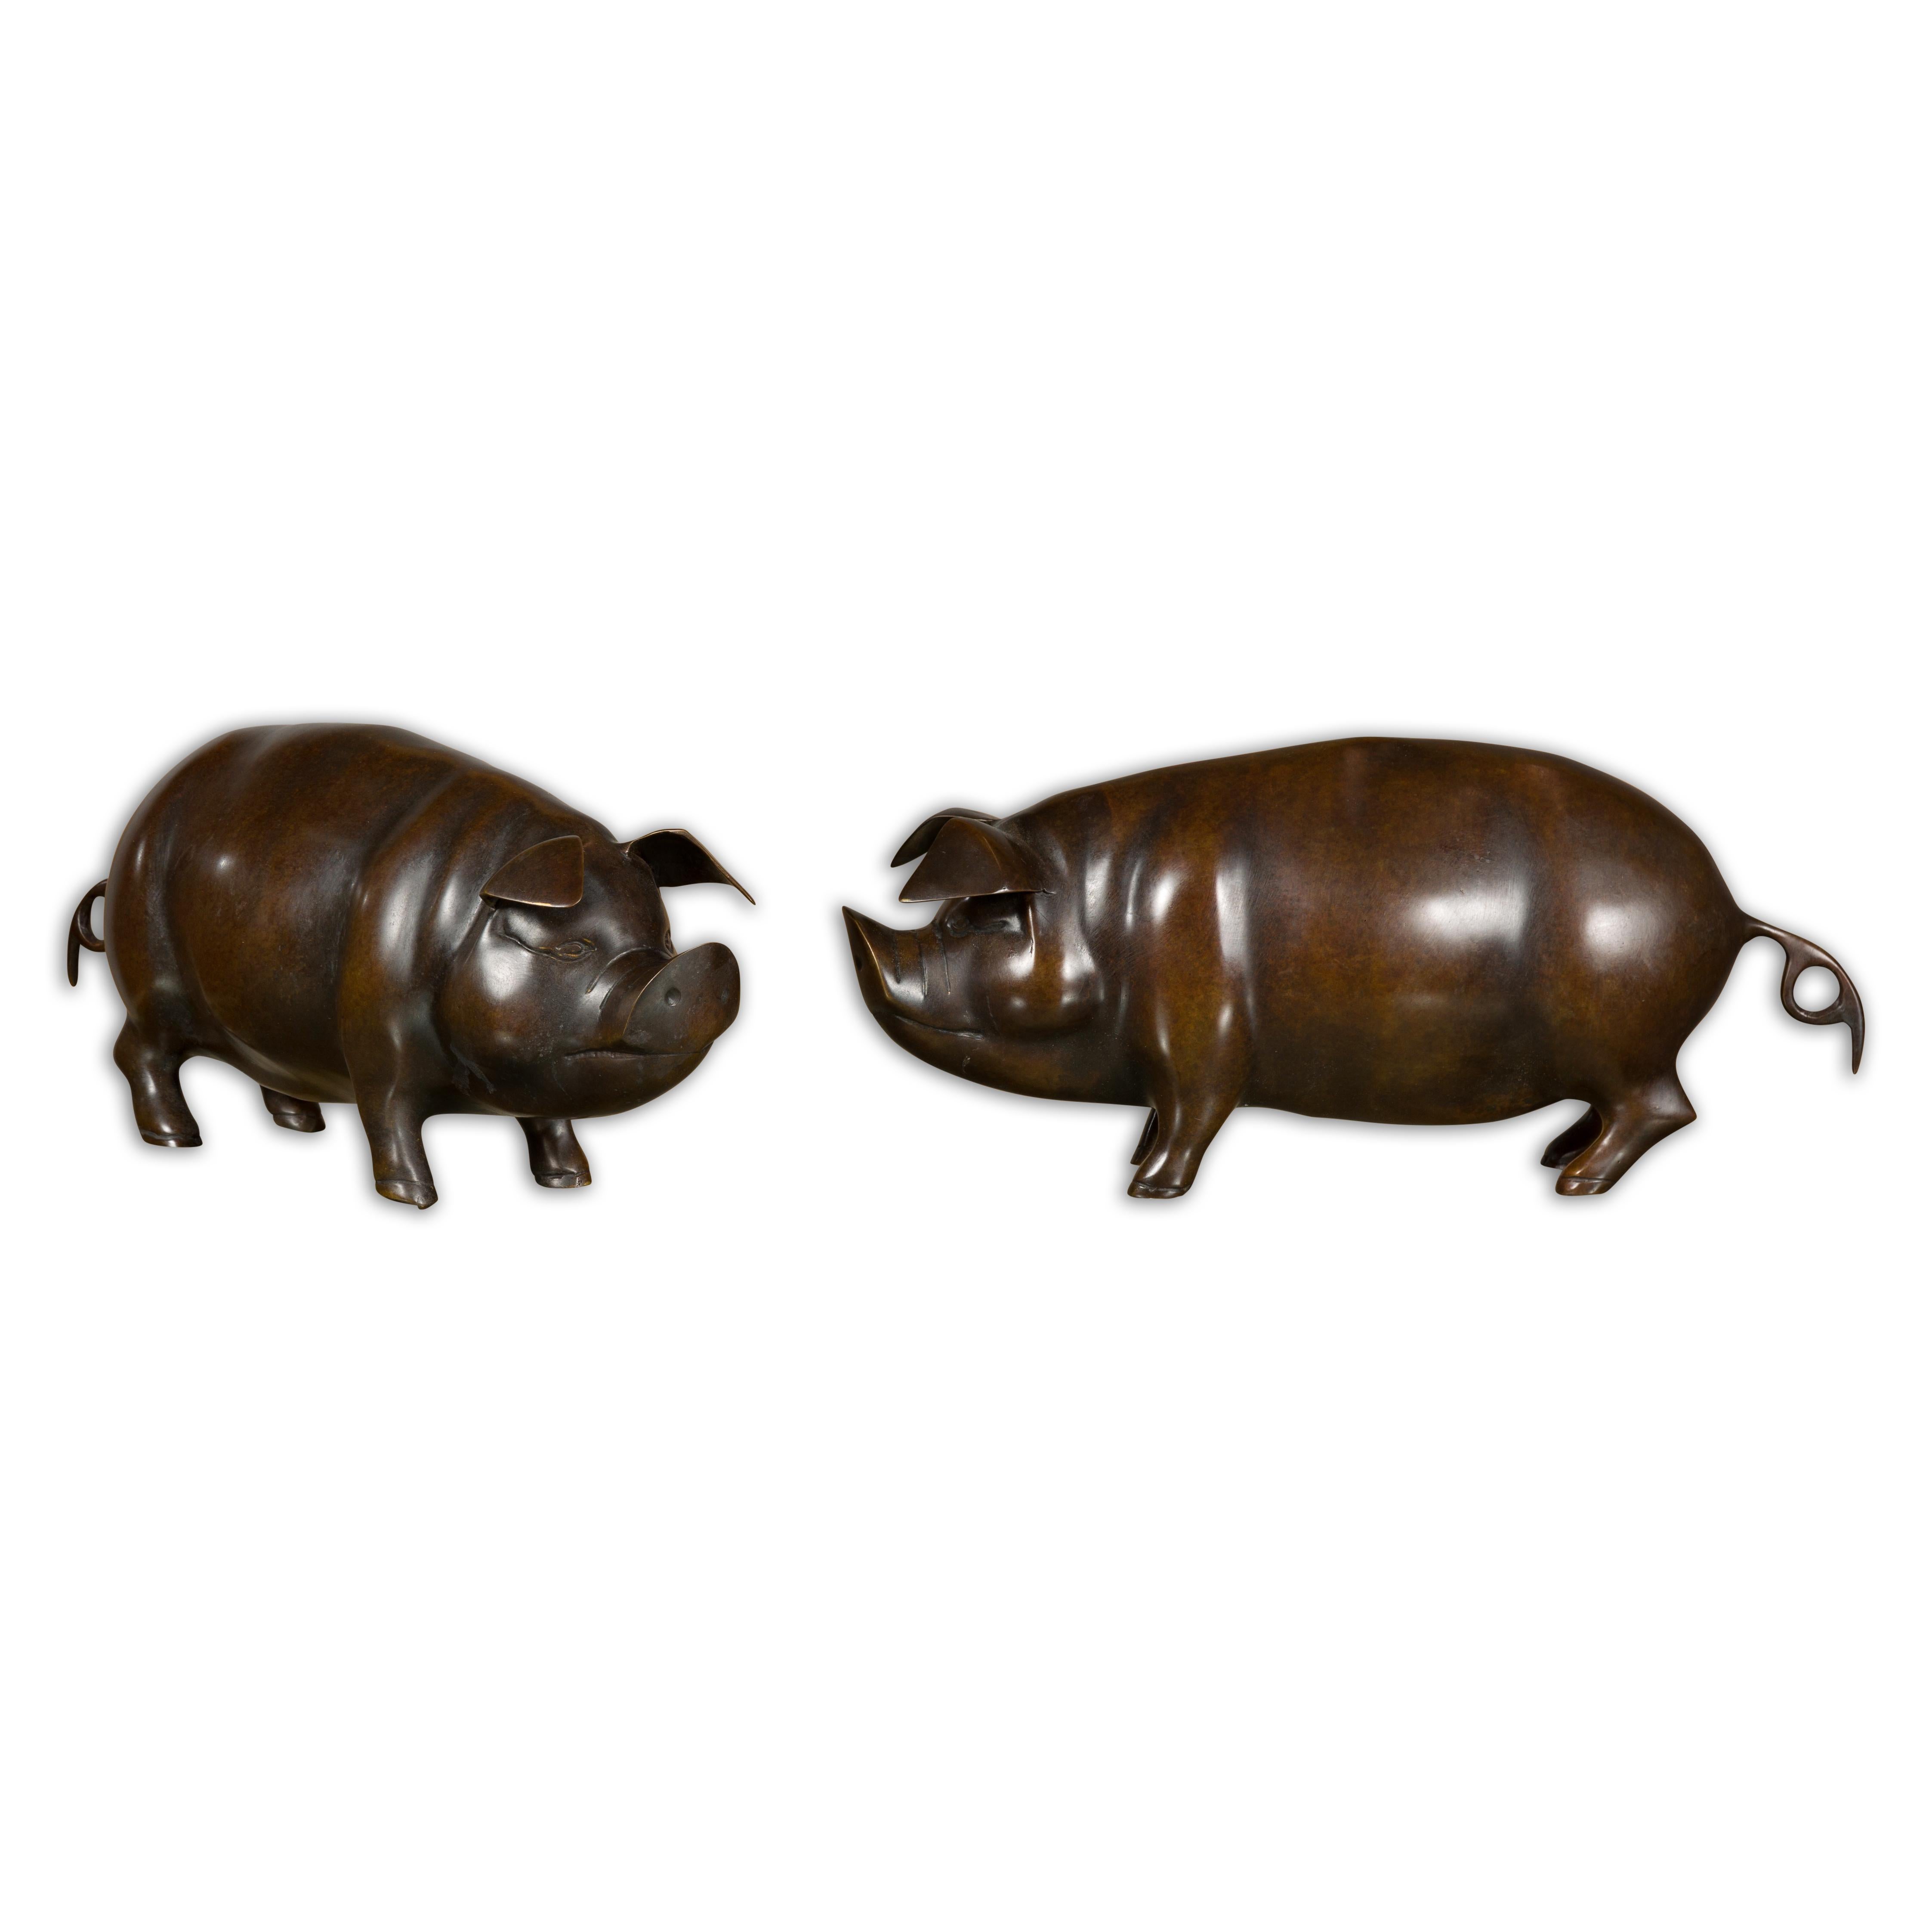 A pair of American bronze pig sculptures from circa 1950-1970 in dark patina. These charming American bronze pig sculptures, dating from the mid-20th century, exude character and whimsy in their small, endearing forms. Crafted with meticulous